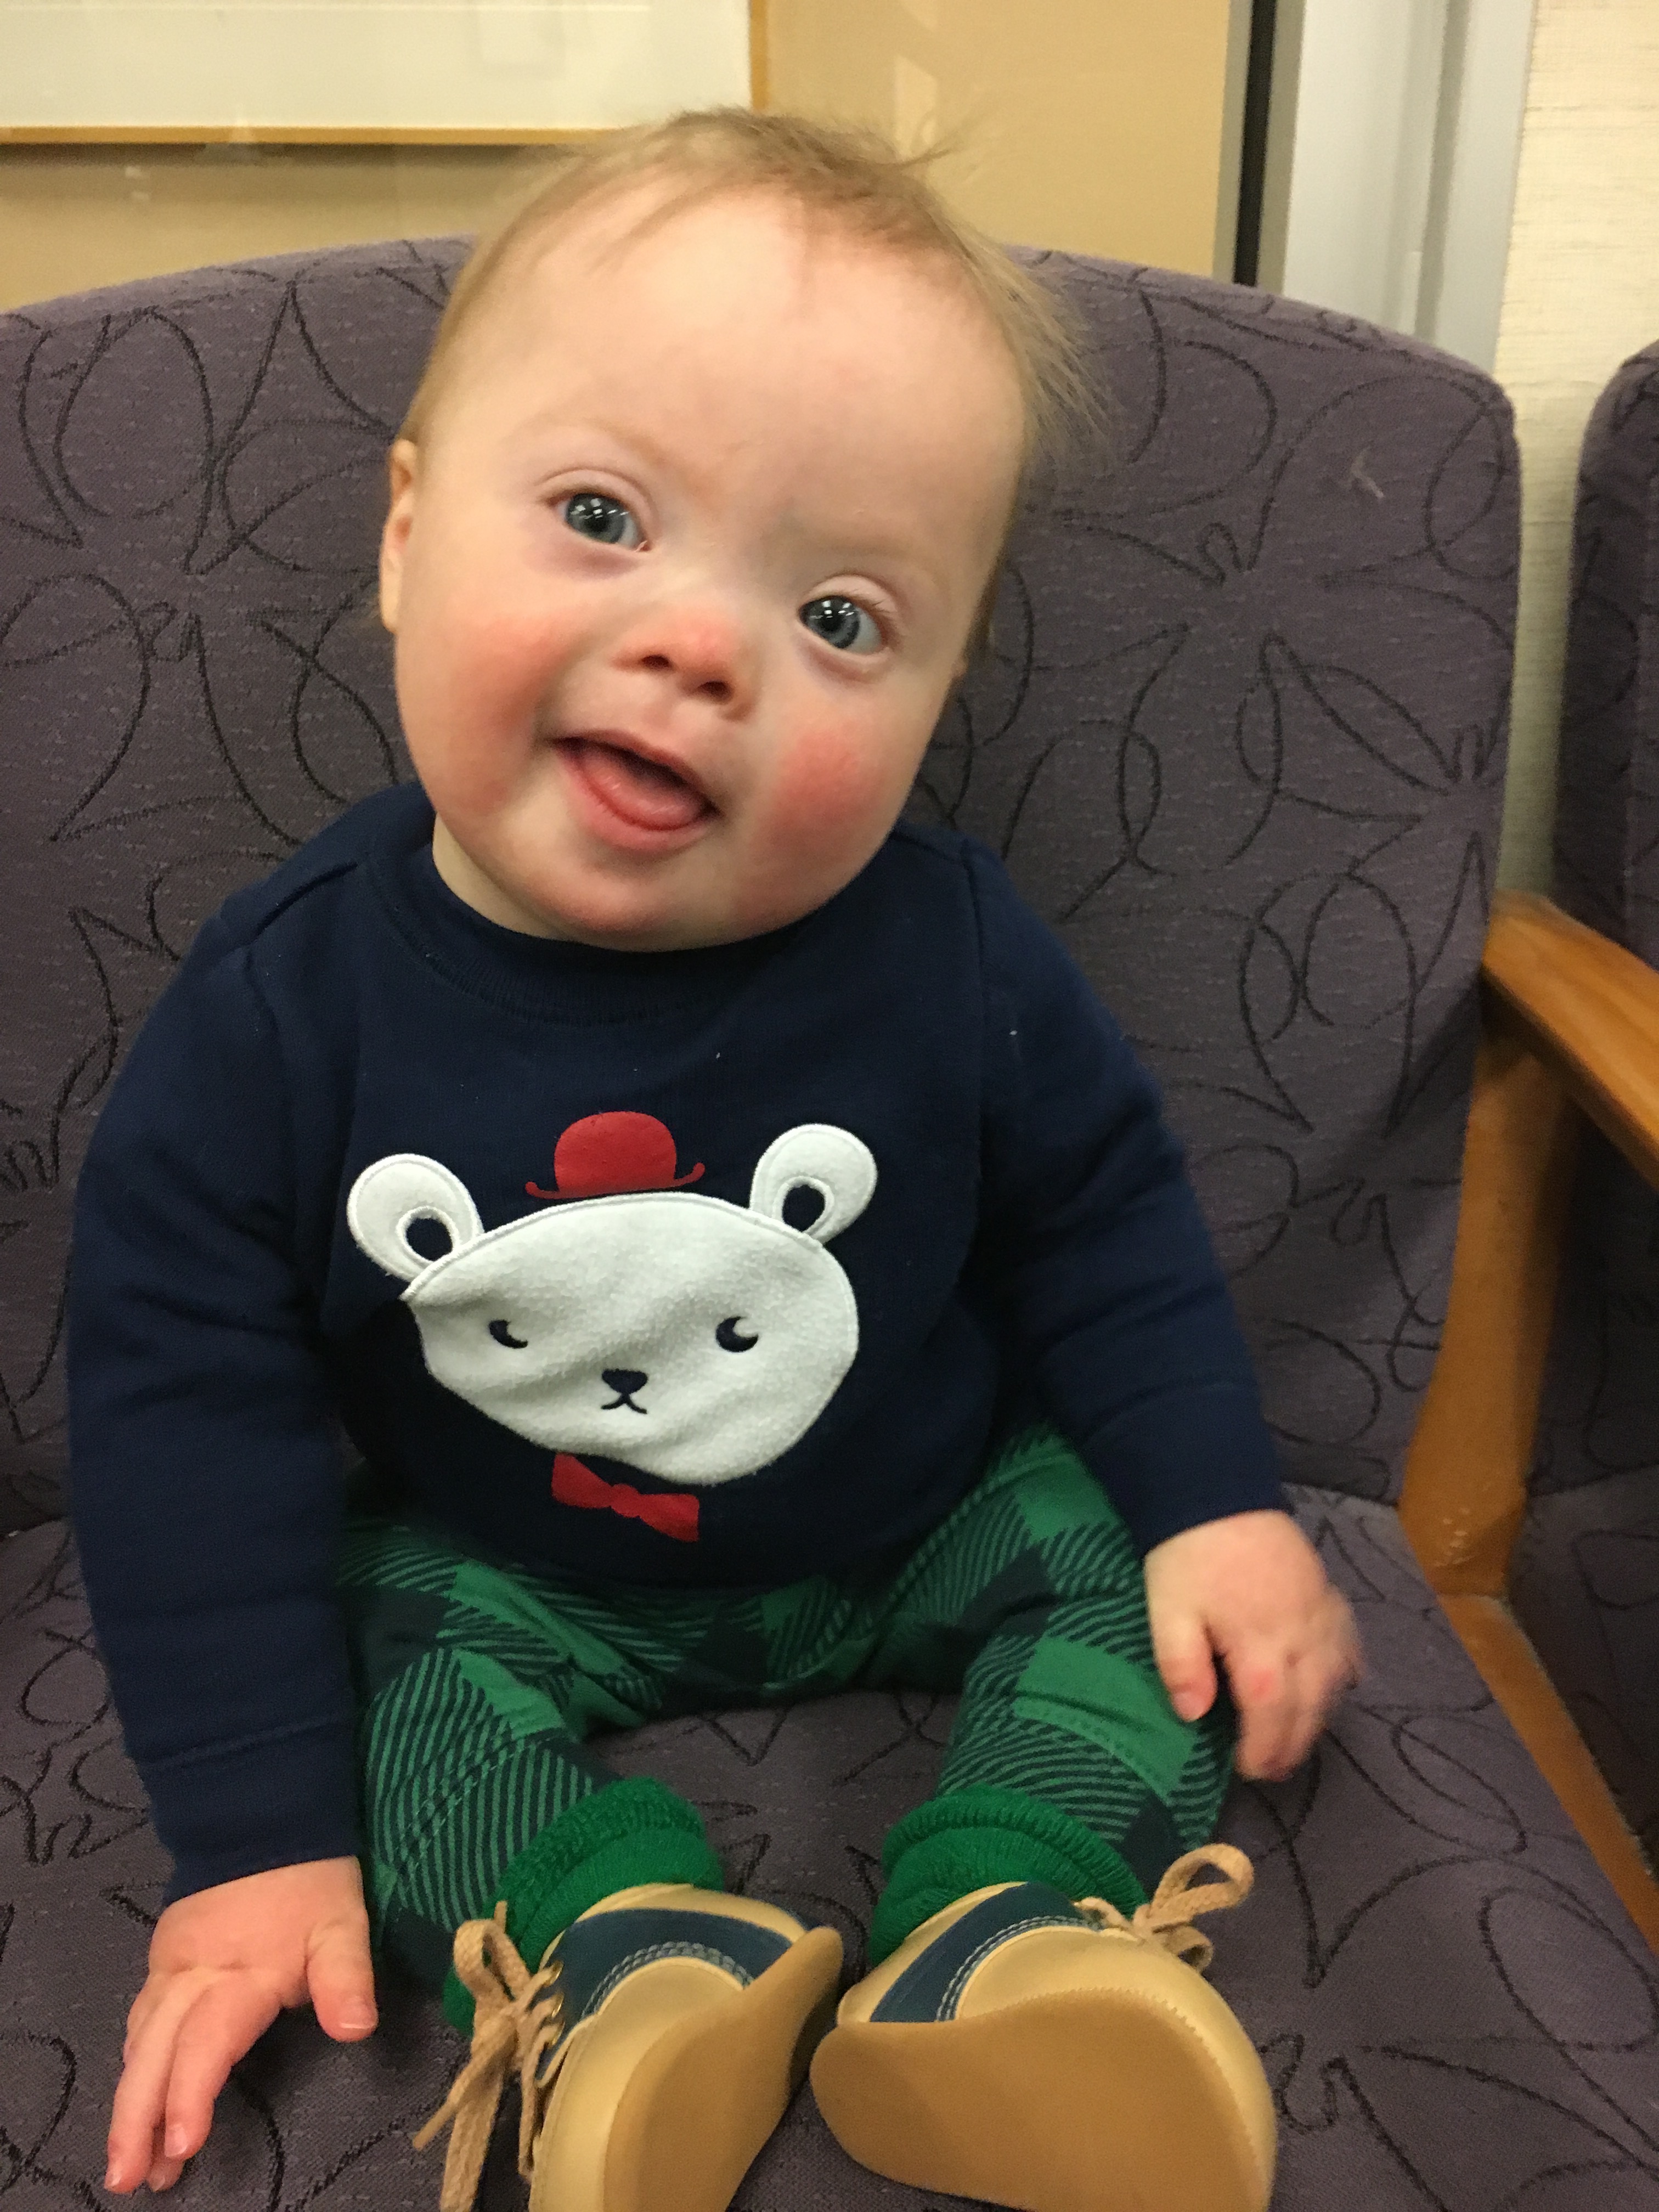 baby with down syndrome sitting in a chair smiling